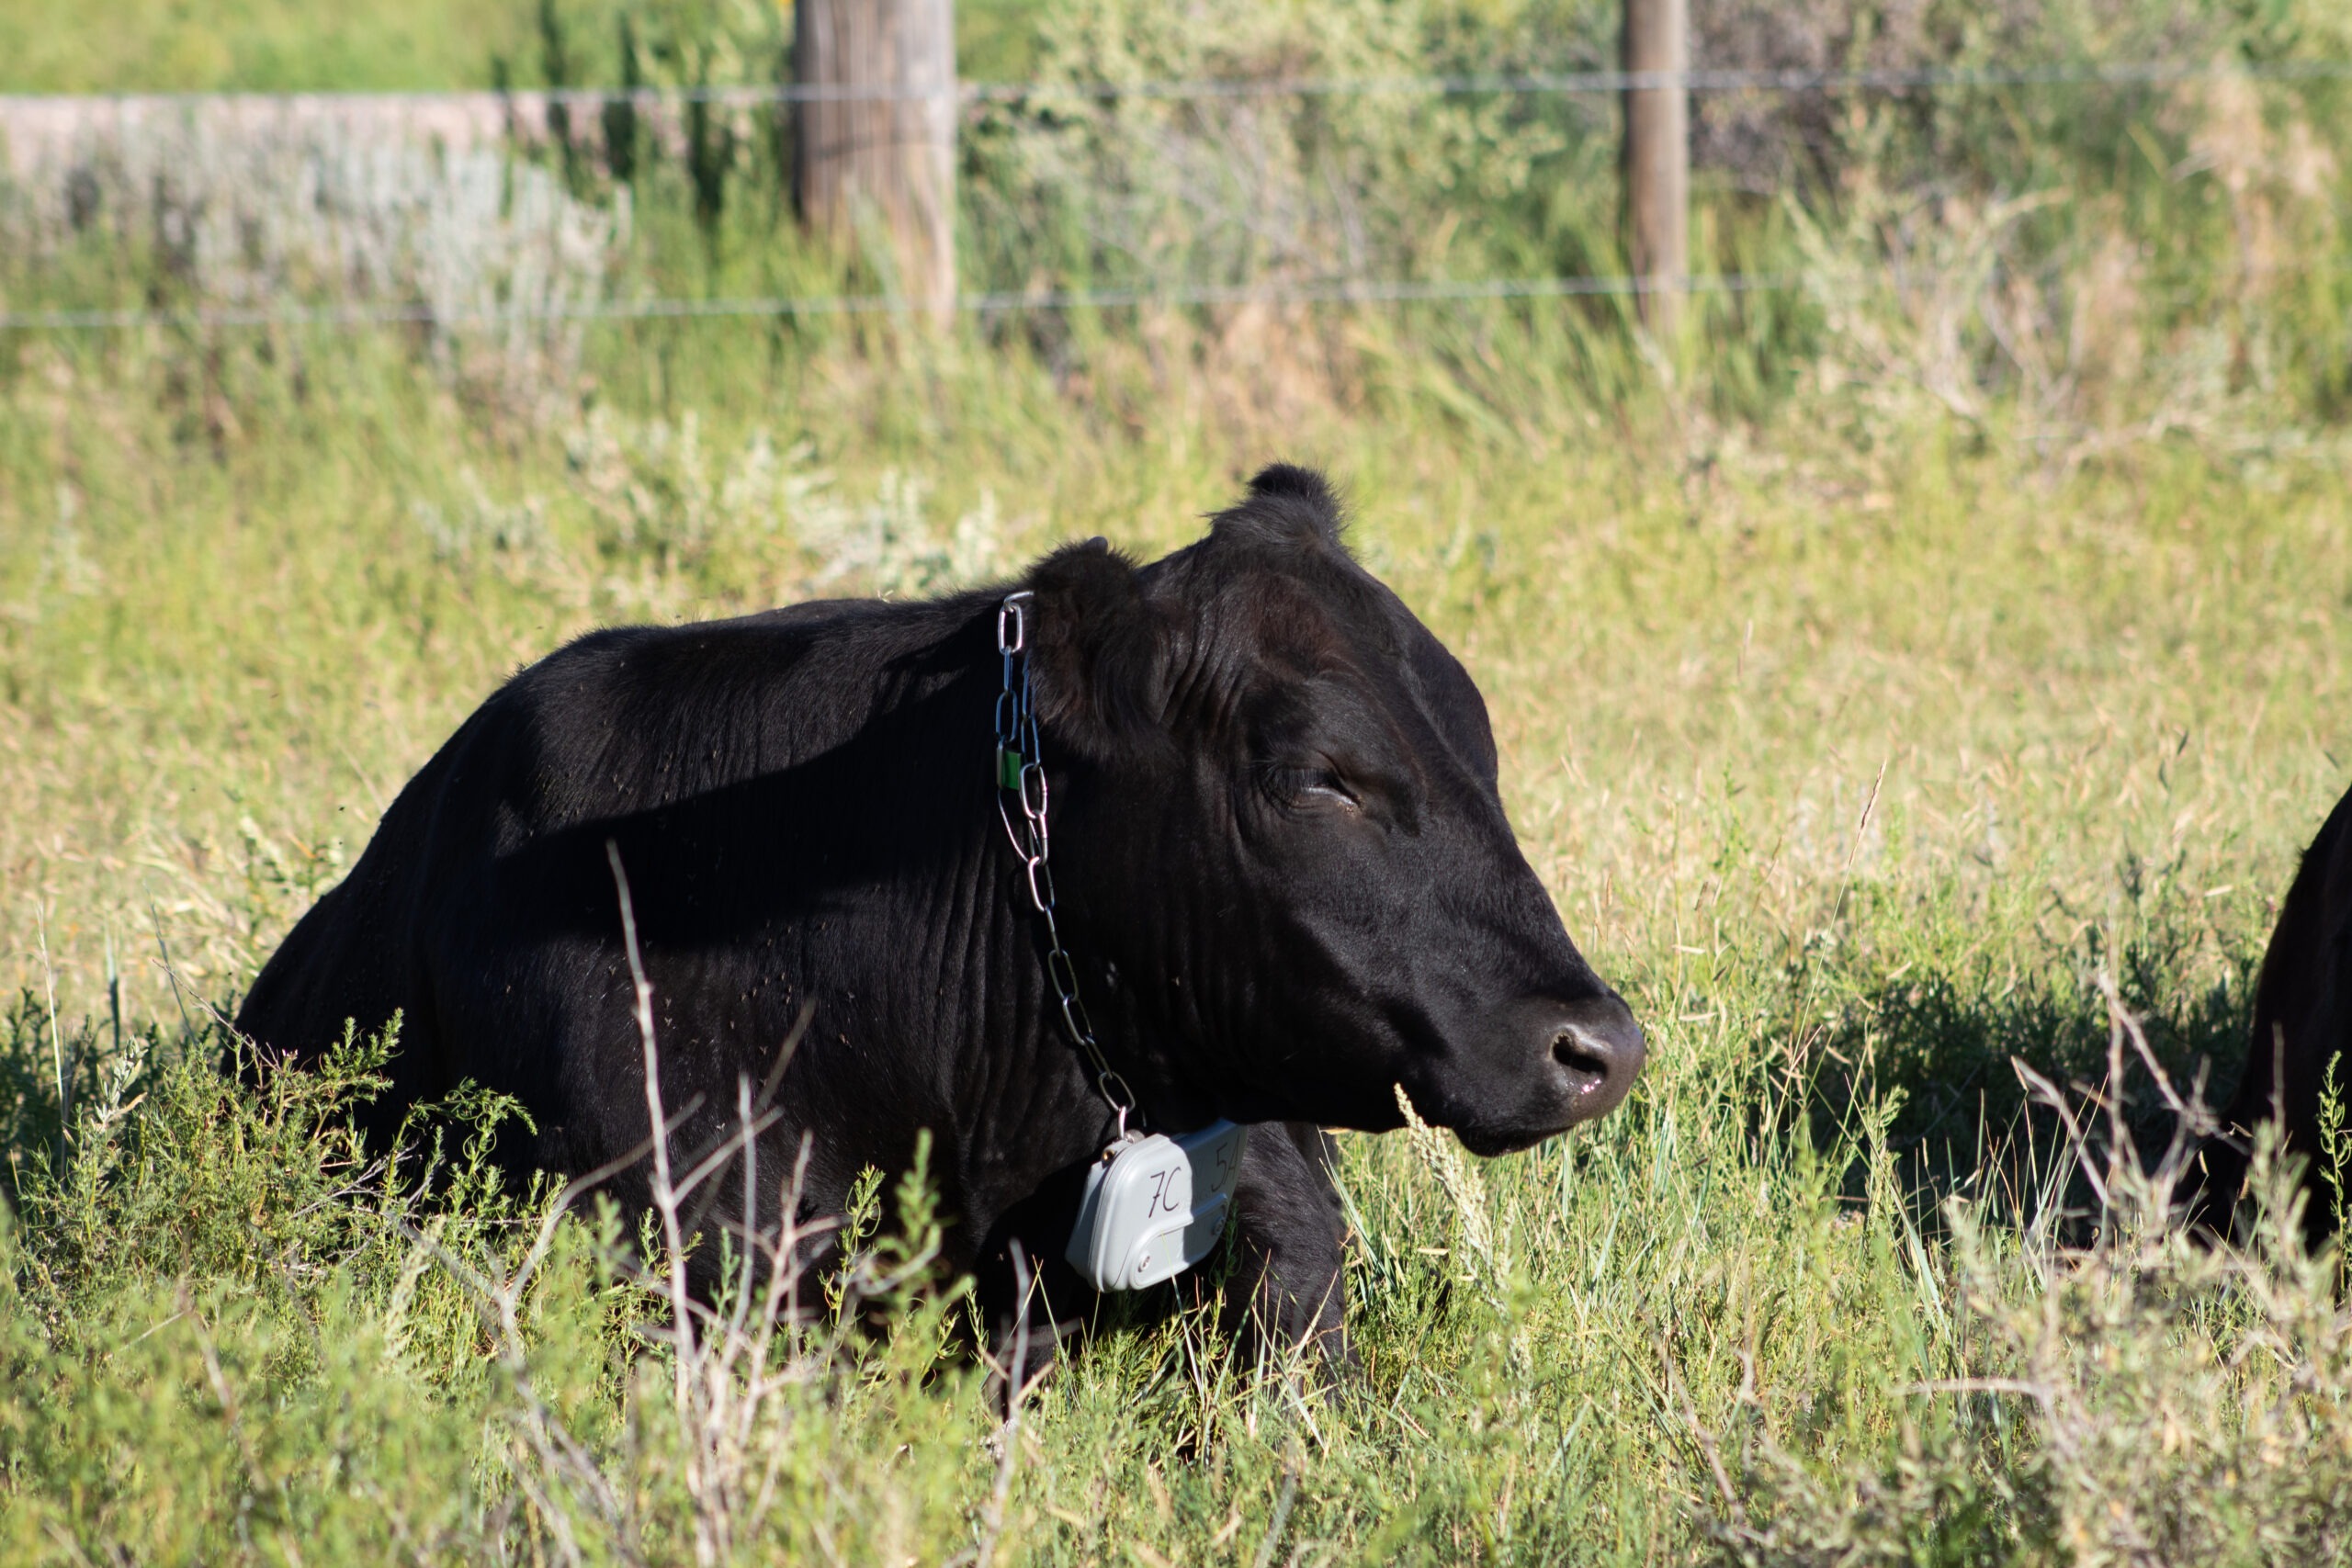 A black cow rests in a field of grasses wearing a virtual fence GPS collar around its neck, secured by chain link.